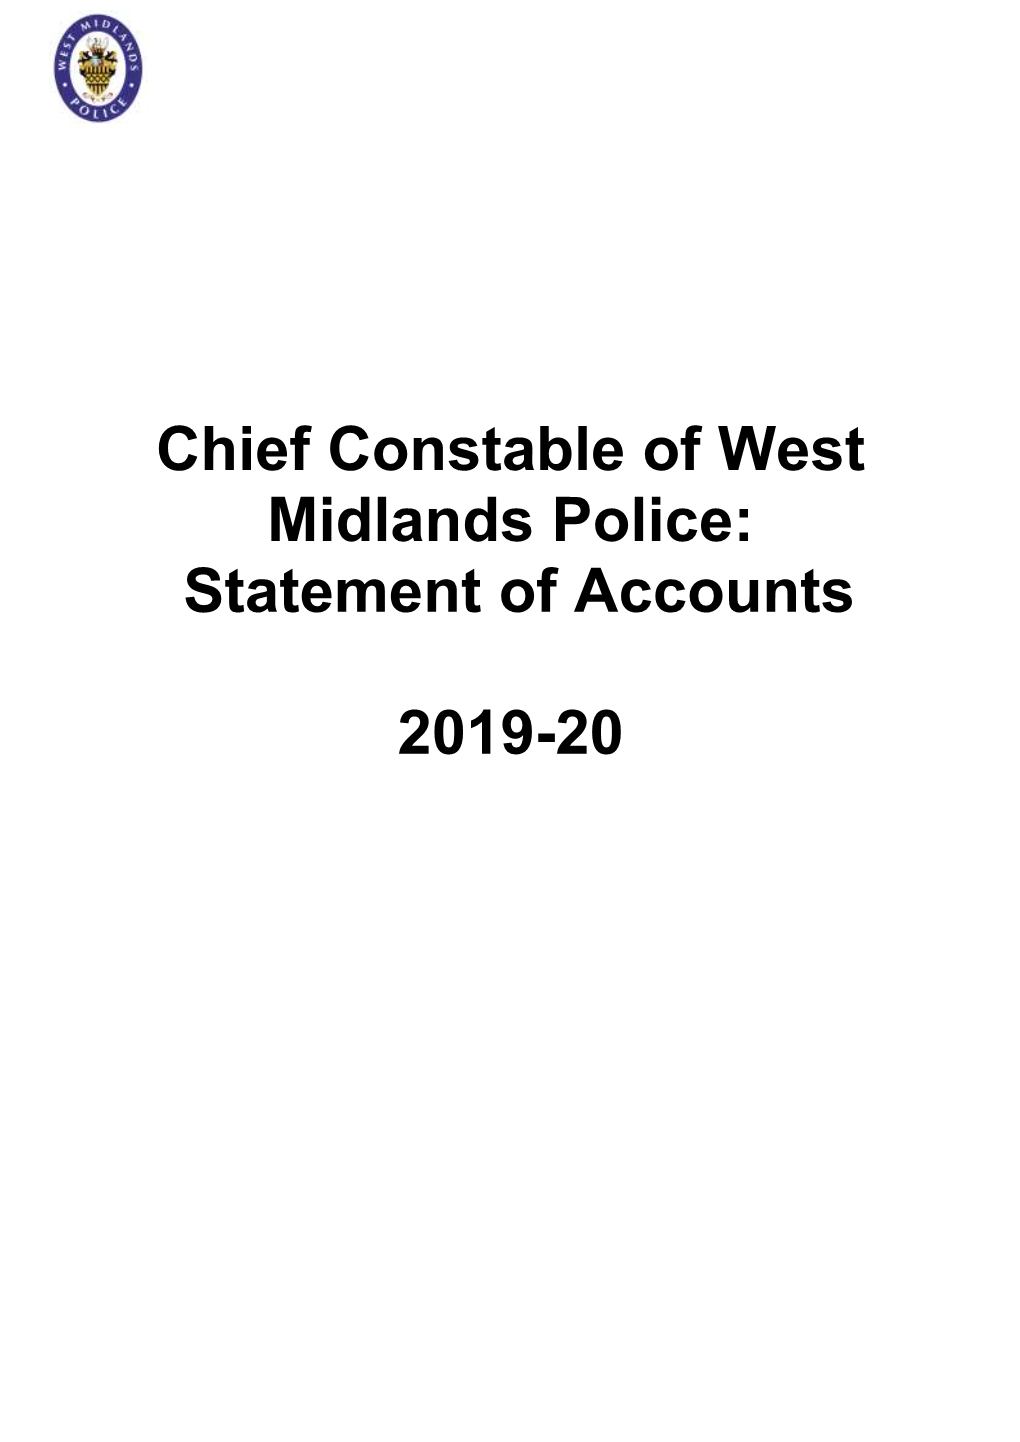 Chief Constable Statement of Accounts 2019-20